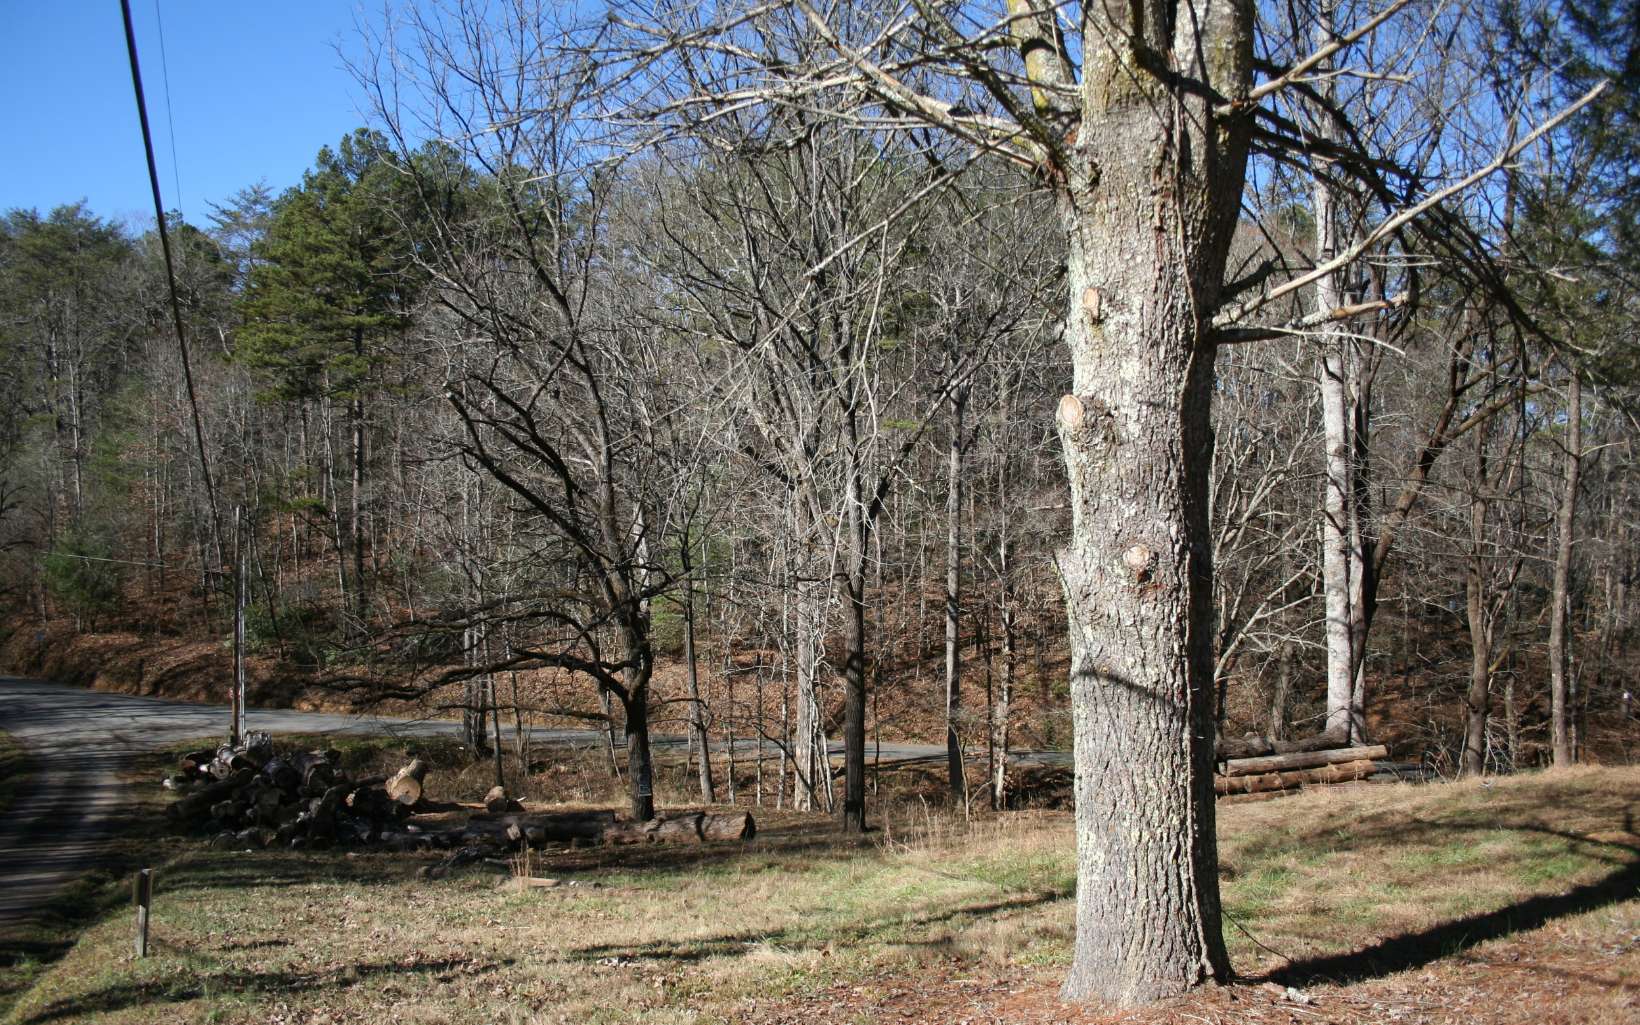 INVESTORS TAKE A LOOK! Gorgeous rushing creek front property. Bring your house plans and enjoy stunning YEAR ROUND MOUNTAIN VIEWS! There is a septic/ well on the property and all utilities in place. Bring your builder and your plans. Under 10 minutes to Downtown Blue Ridge. County water across the road and fire hydrant.